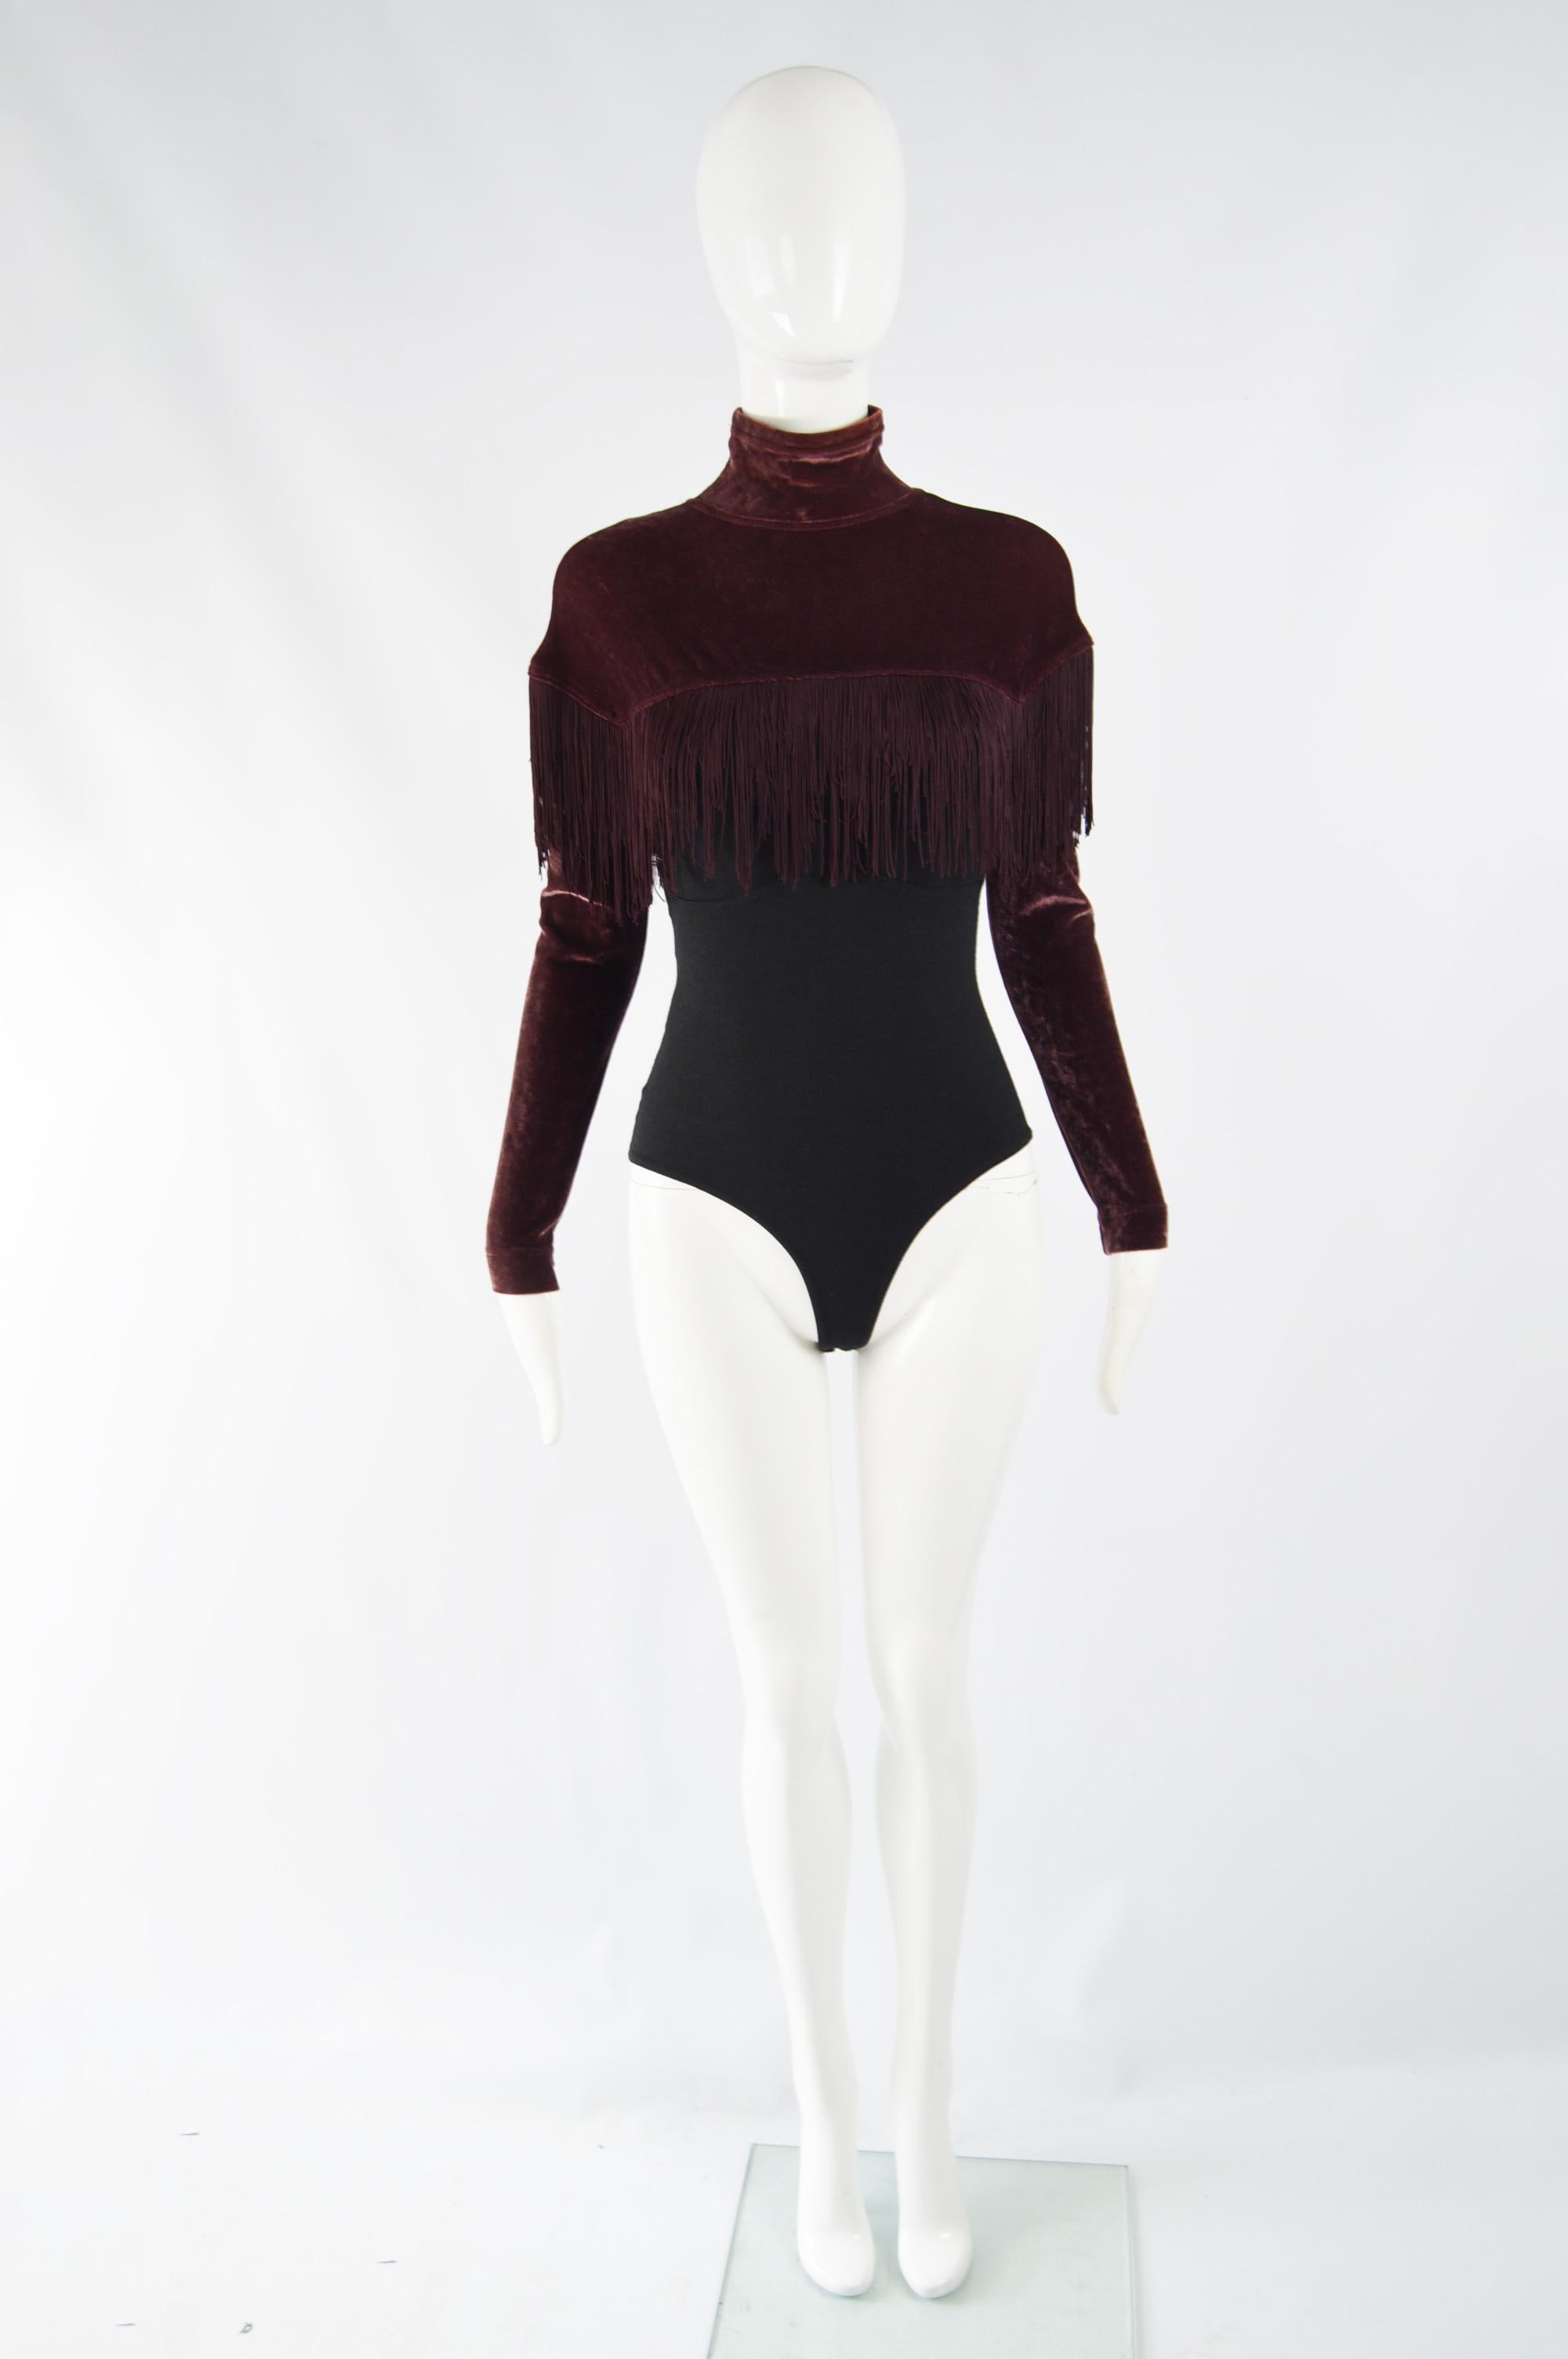 A fabulous vintage body suit from the 90s by luxury fashion designer, Rifat Ozbek. In a wine colored velvet on the long sleeves and high neck with fringe adding a playful touch and a black knit body.

Size: Unlabelled; fits like a modern womens UK